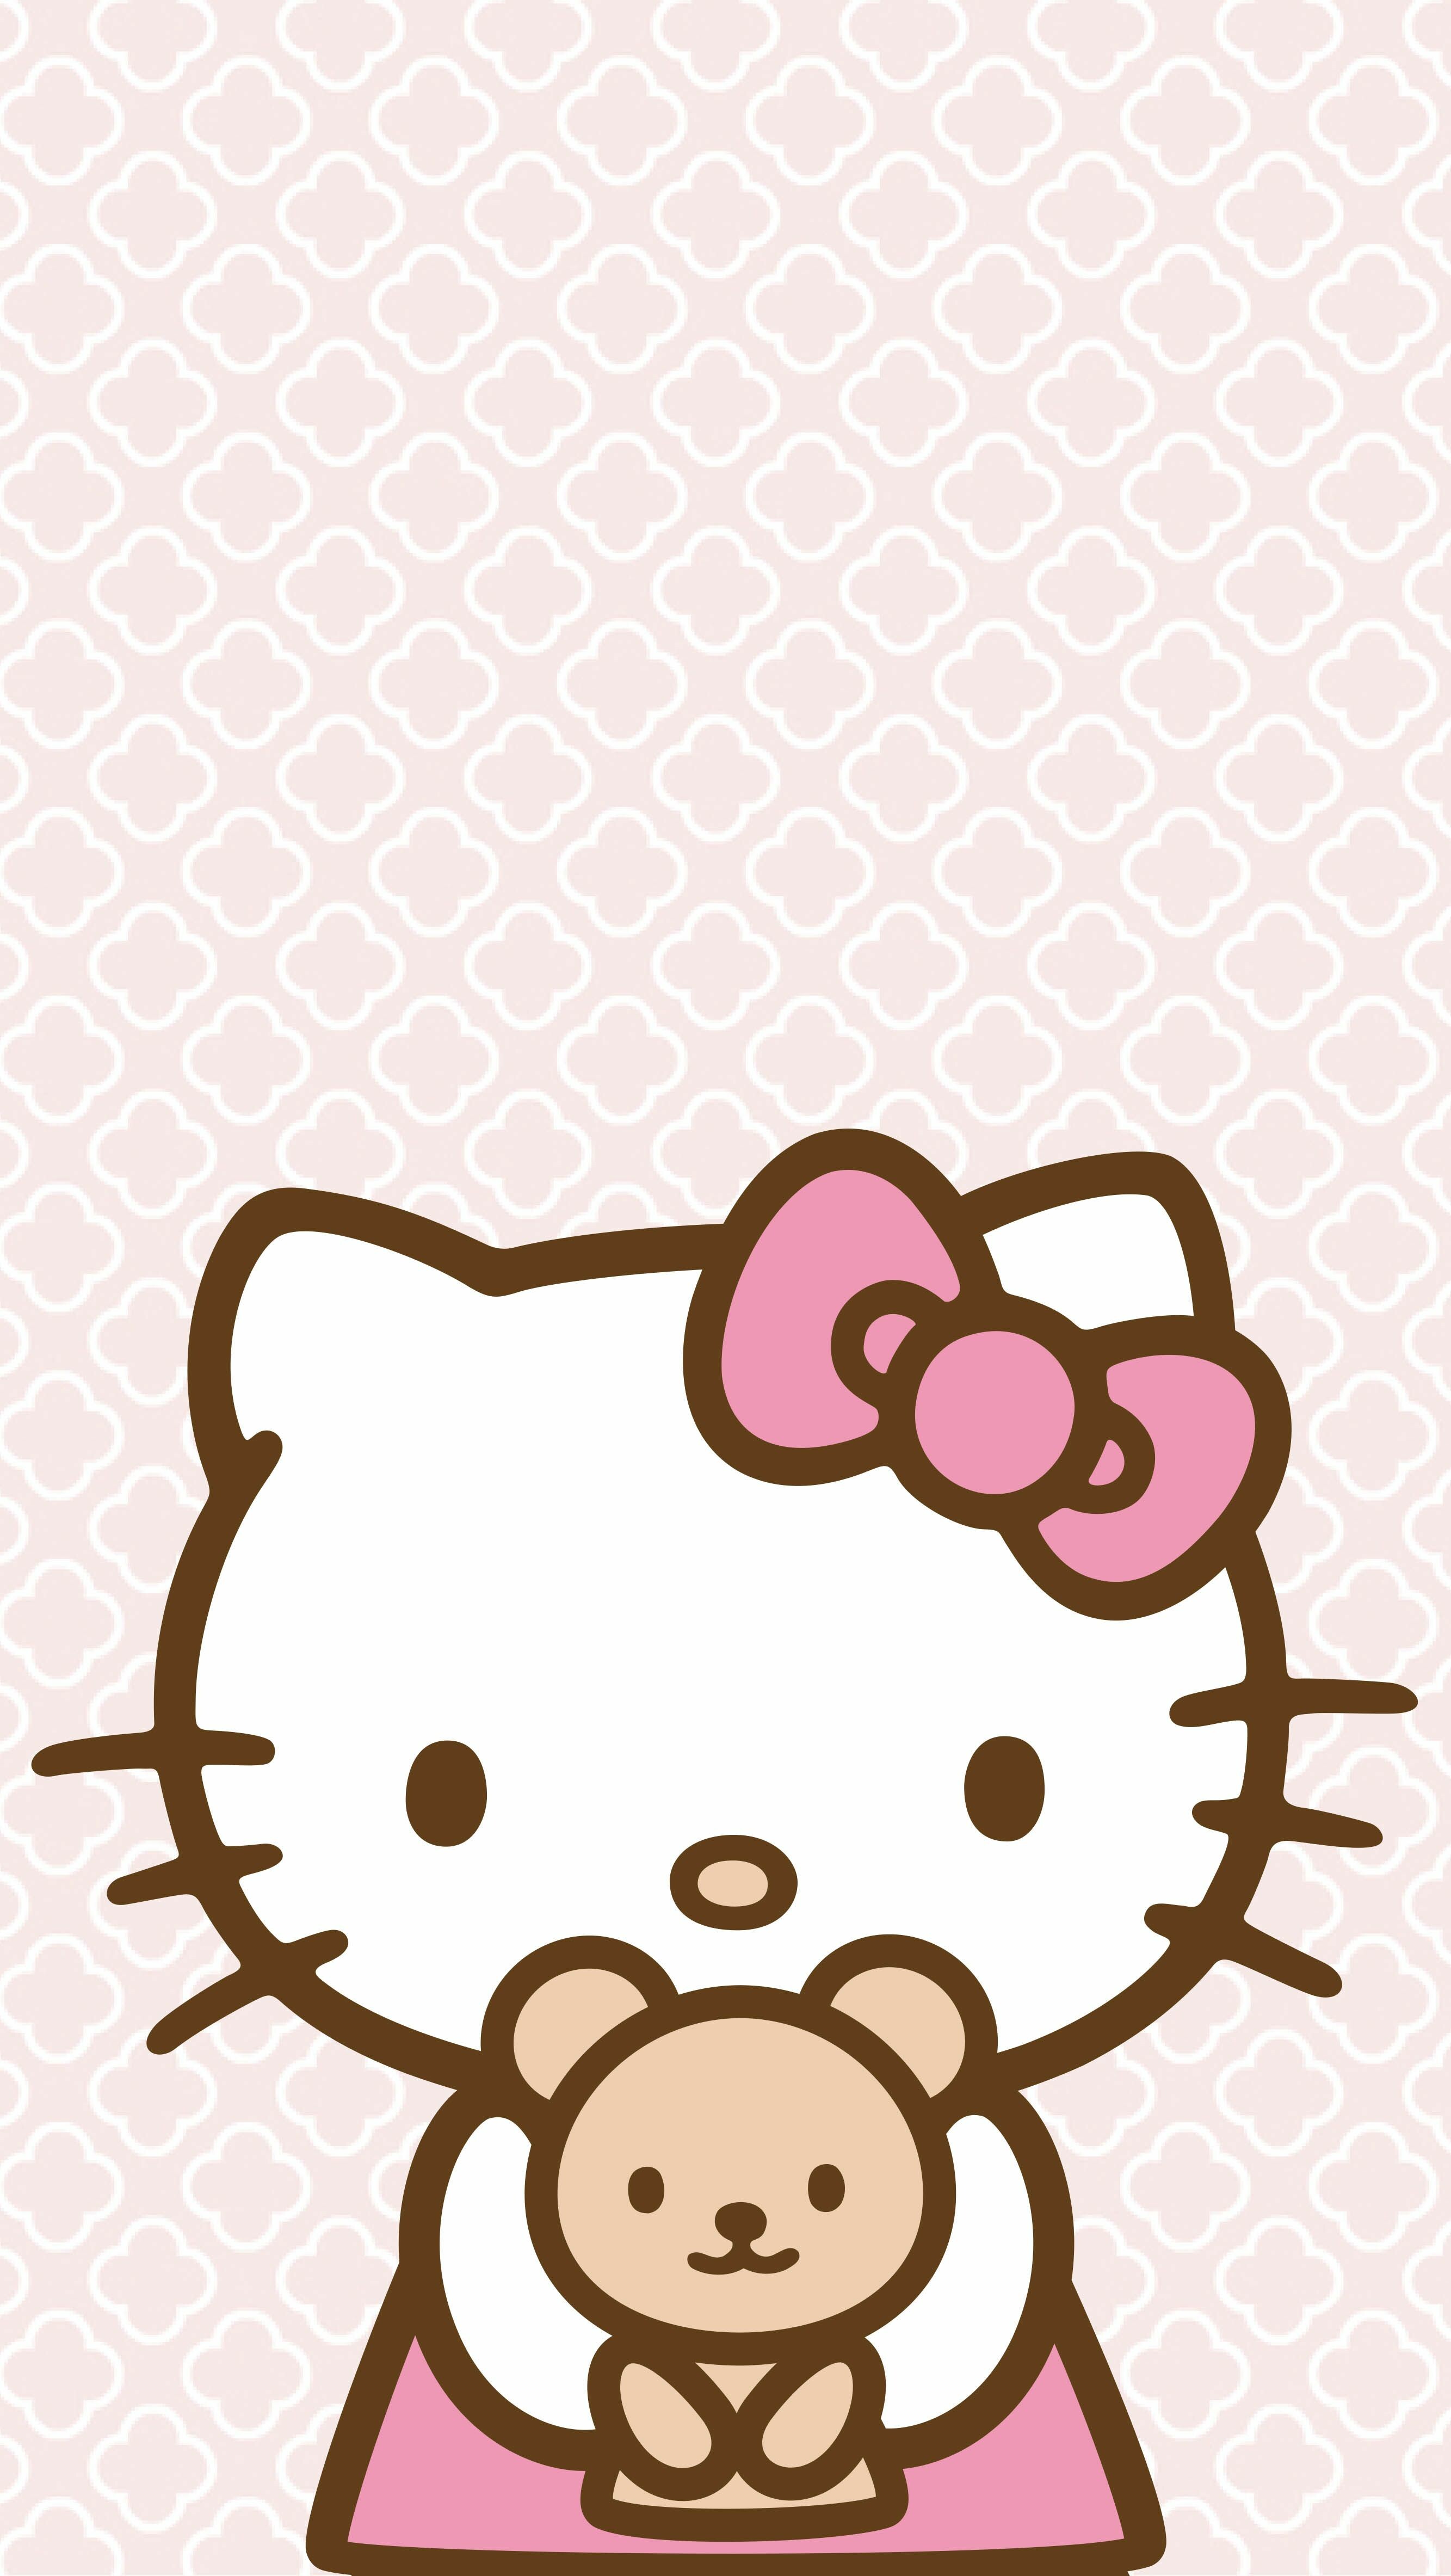 Hello Kitty Birthday Wallpaper: HD, 4K, 5K for PC and Mobile. Download free image for iPhone, Android